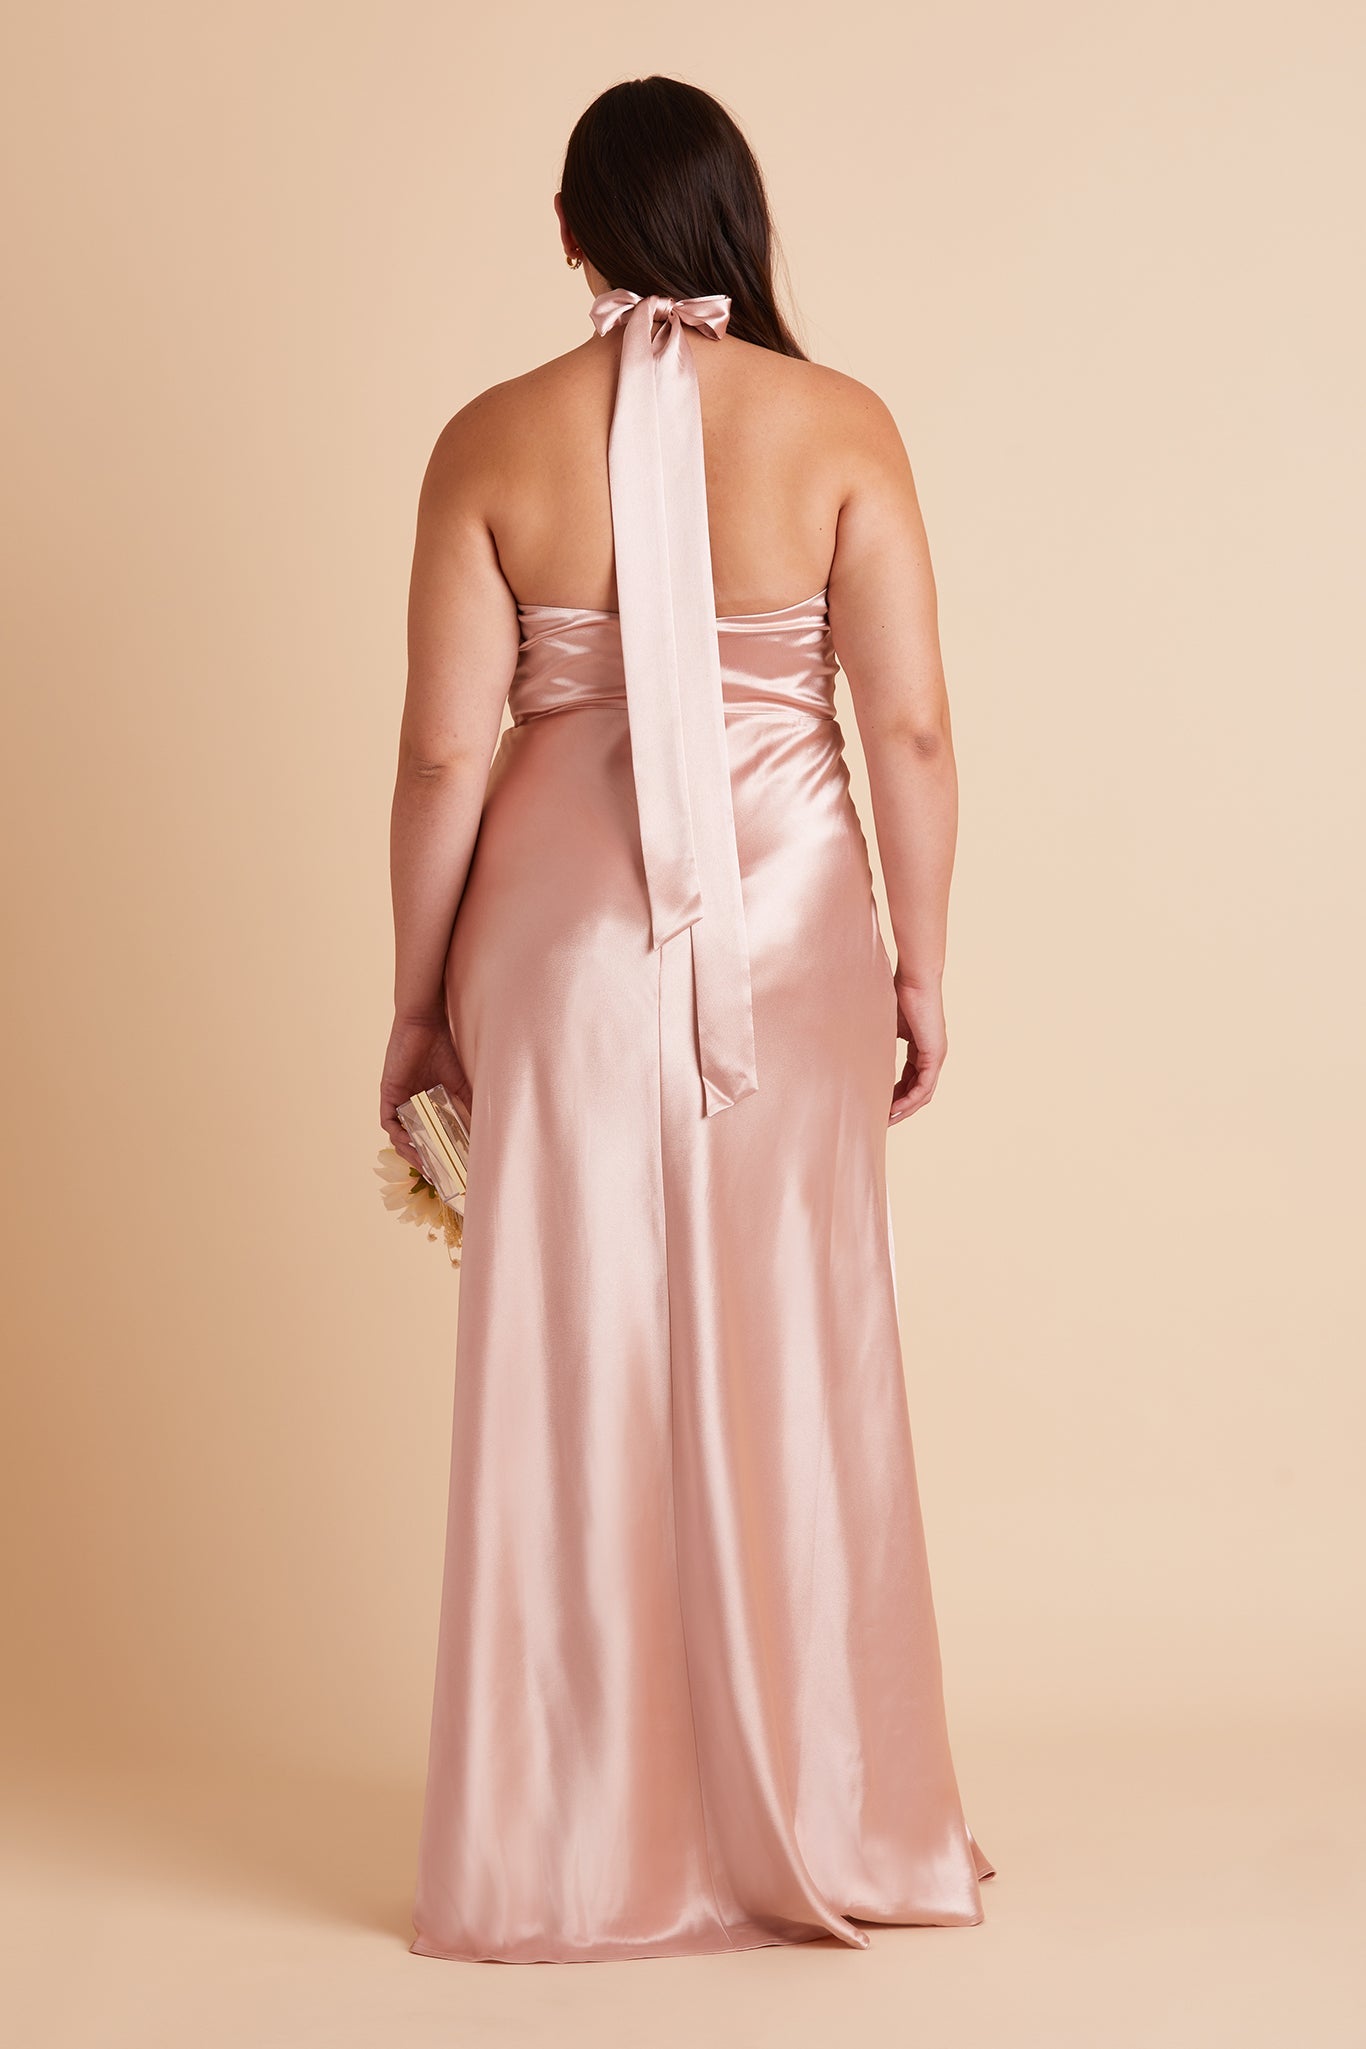 Monica plus size bridesmaid dress with slit in rose gold satin by Birdy Grey, back view